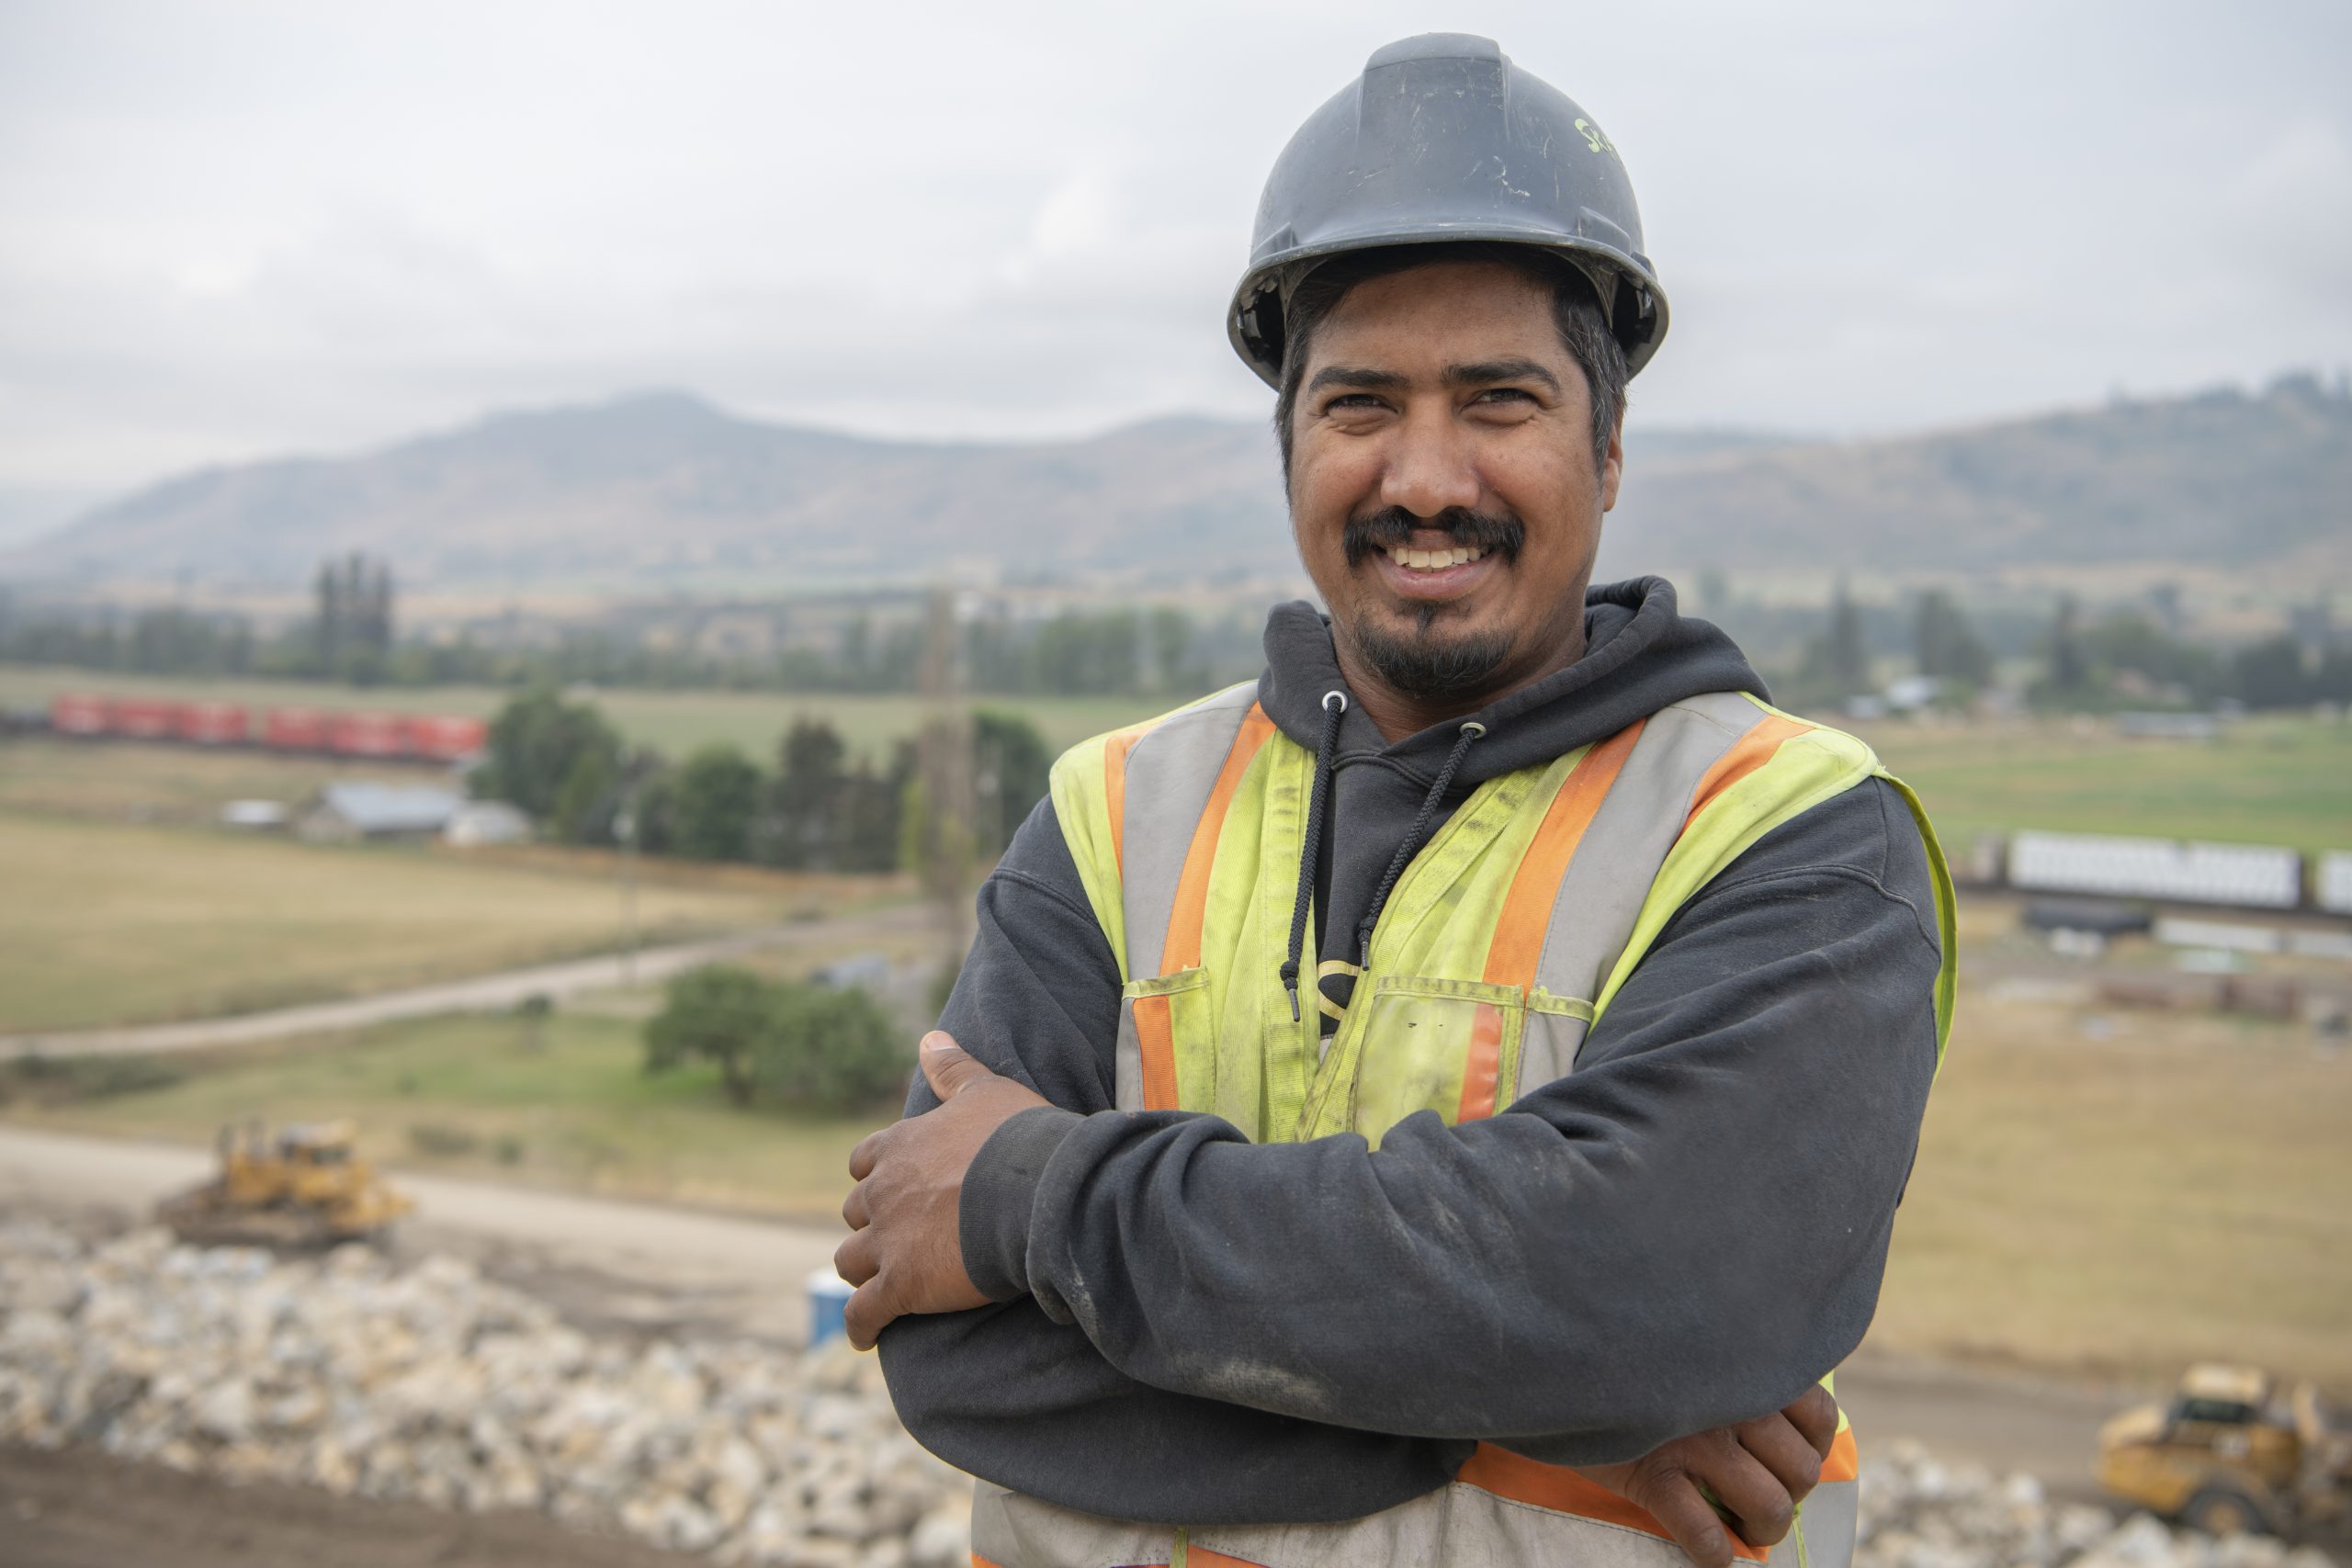 An image of a worker named Cody smiling